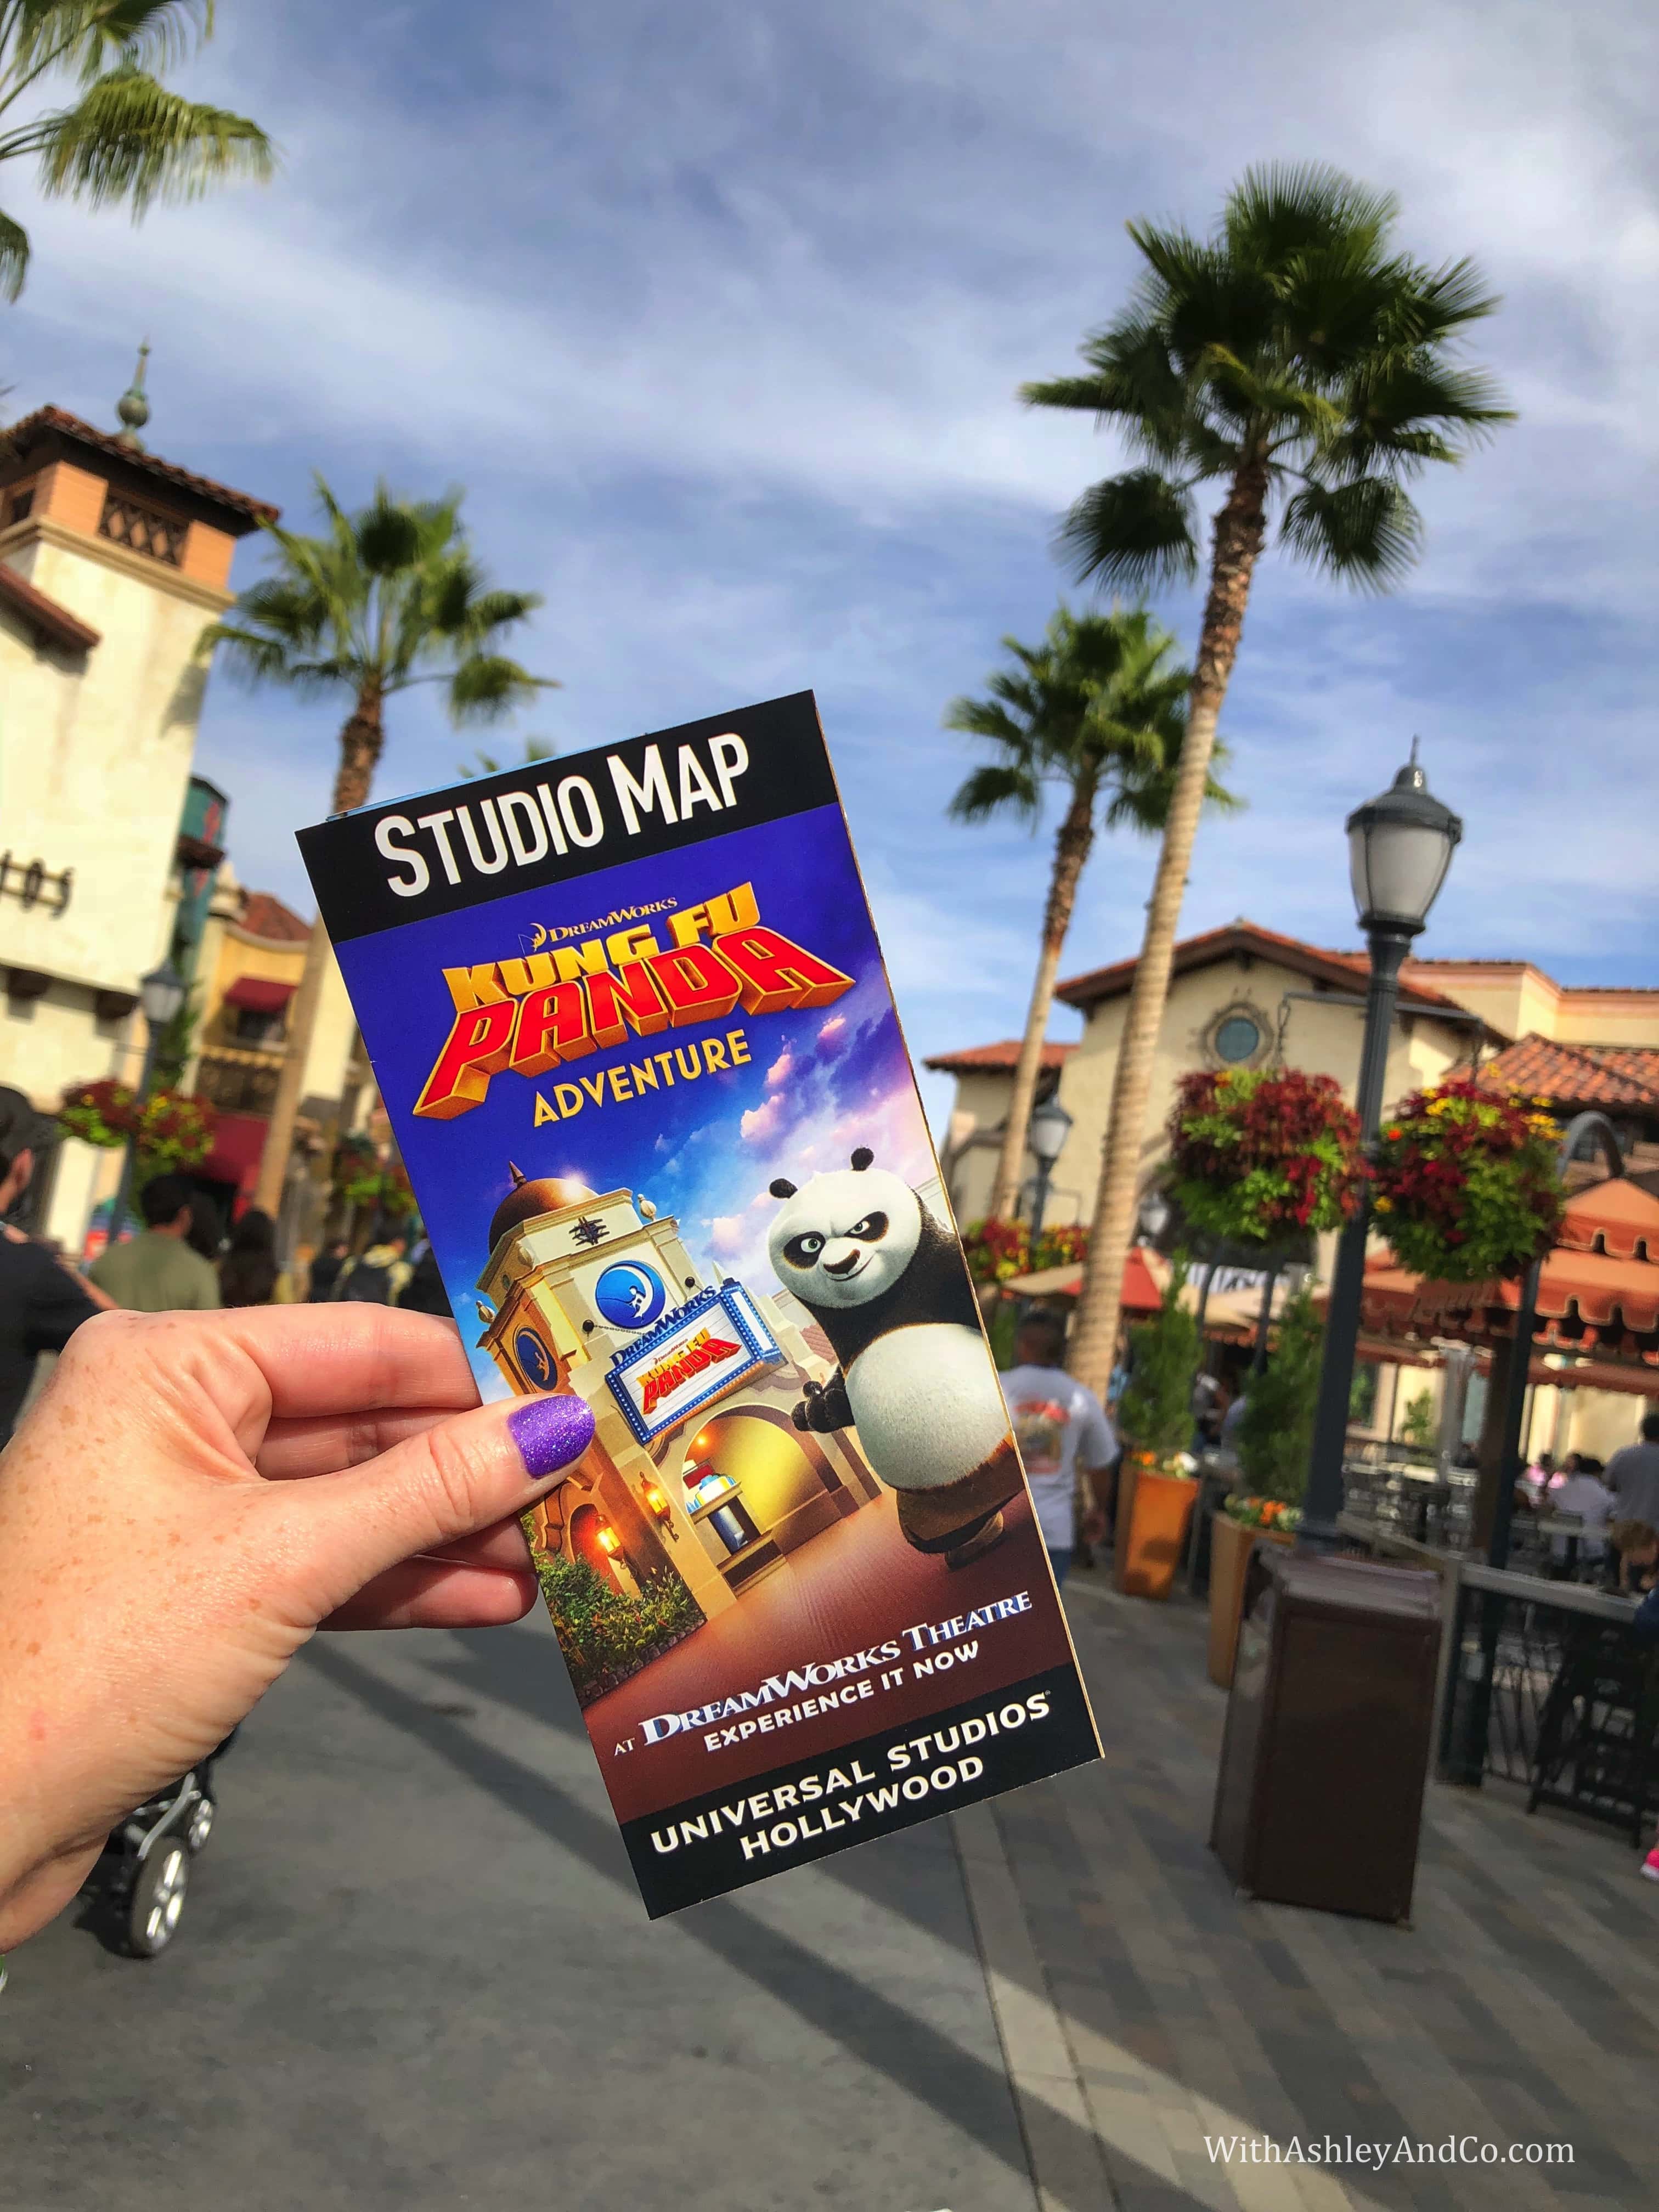 7 Best Rides at Universal Studios Hollywood 